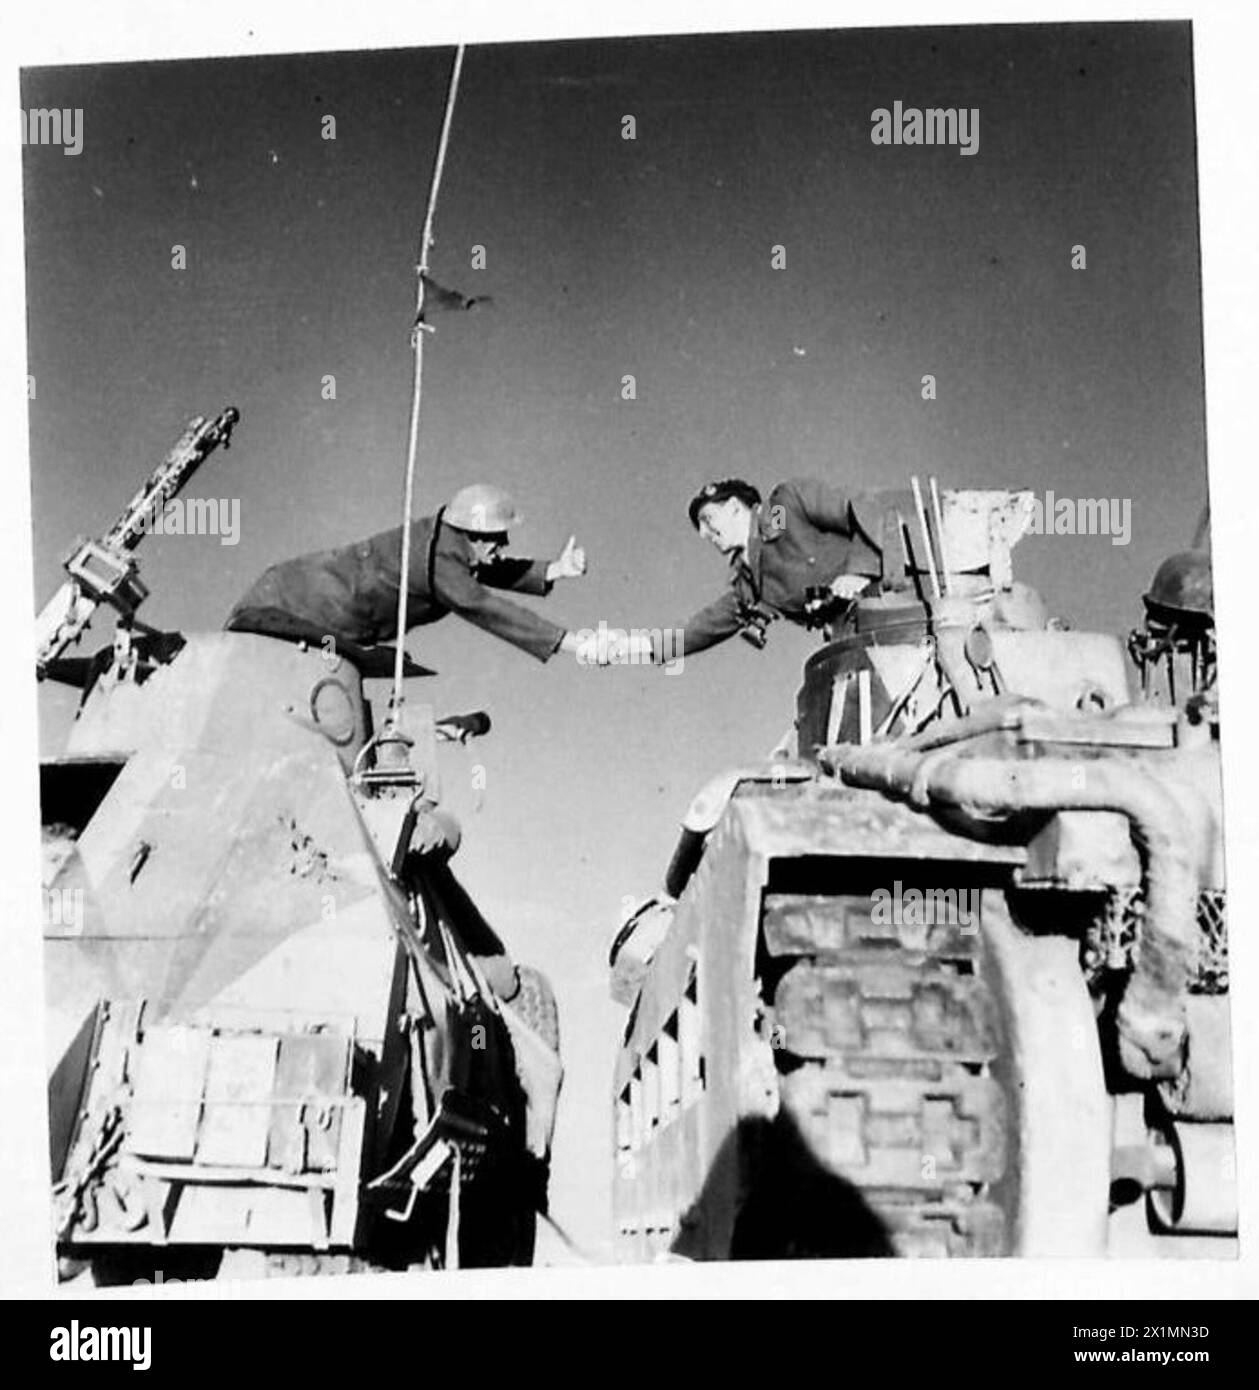 PICTURES FROM TOBRUK BEFORE THE BATTLE - Two tank commanders say 'Cheerio' before setting out, British Army Stock Photo